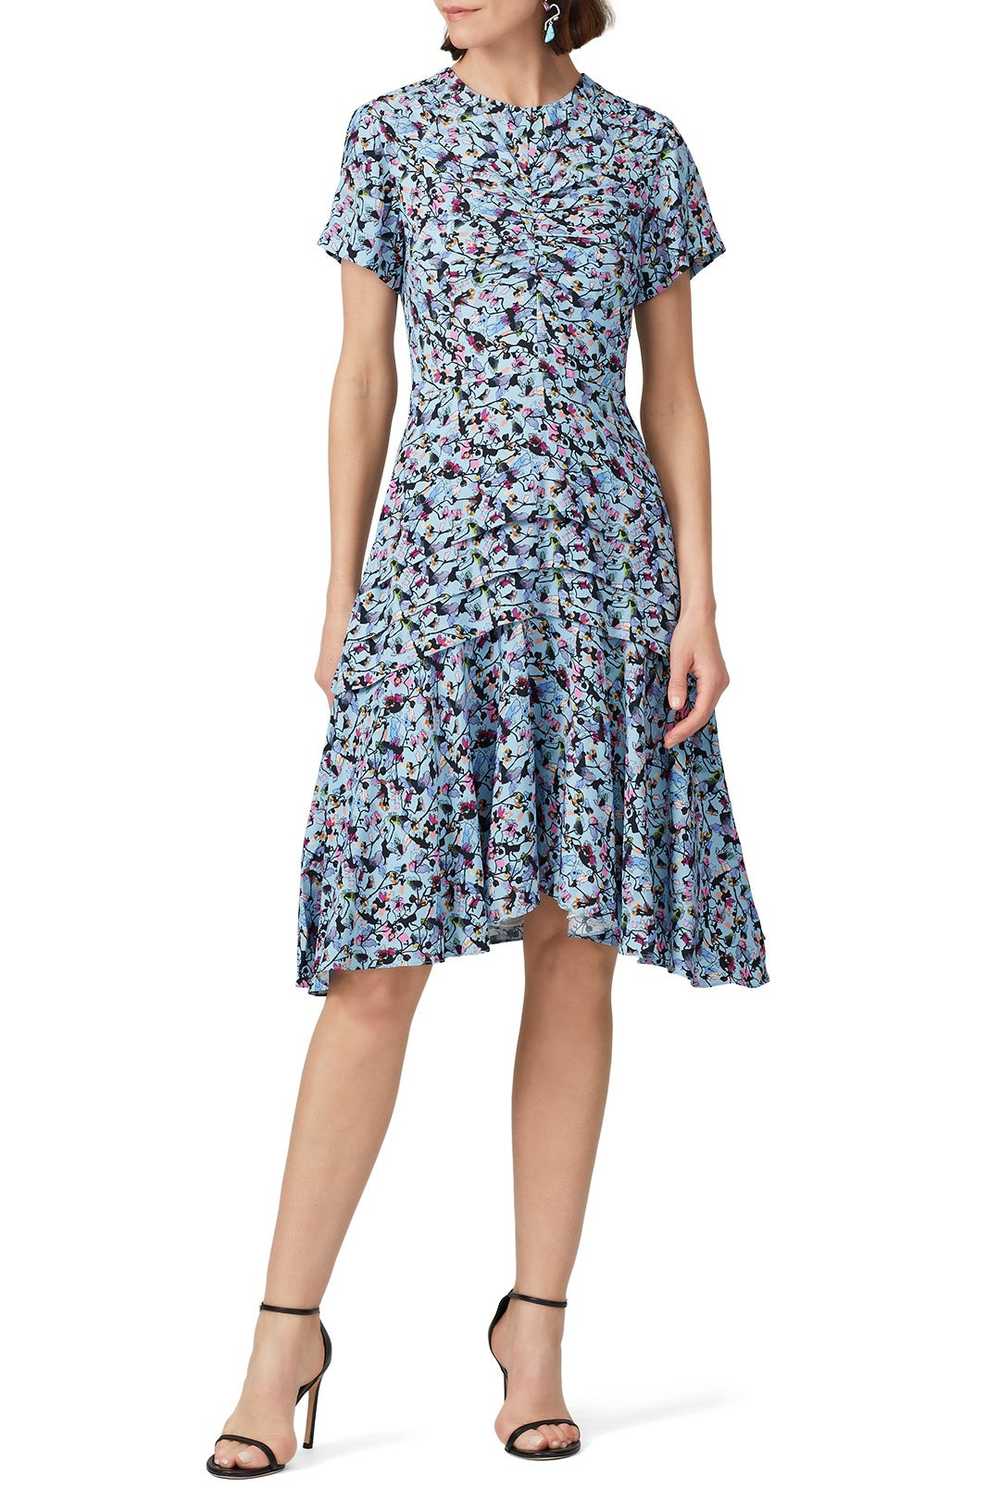 Jason Wu Collection Blue Floral Day Dress - image 1